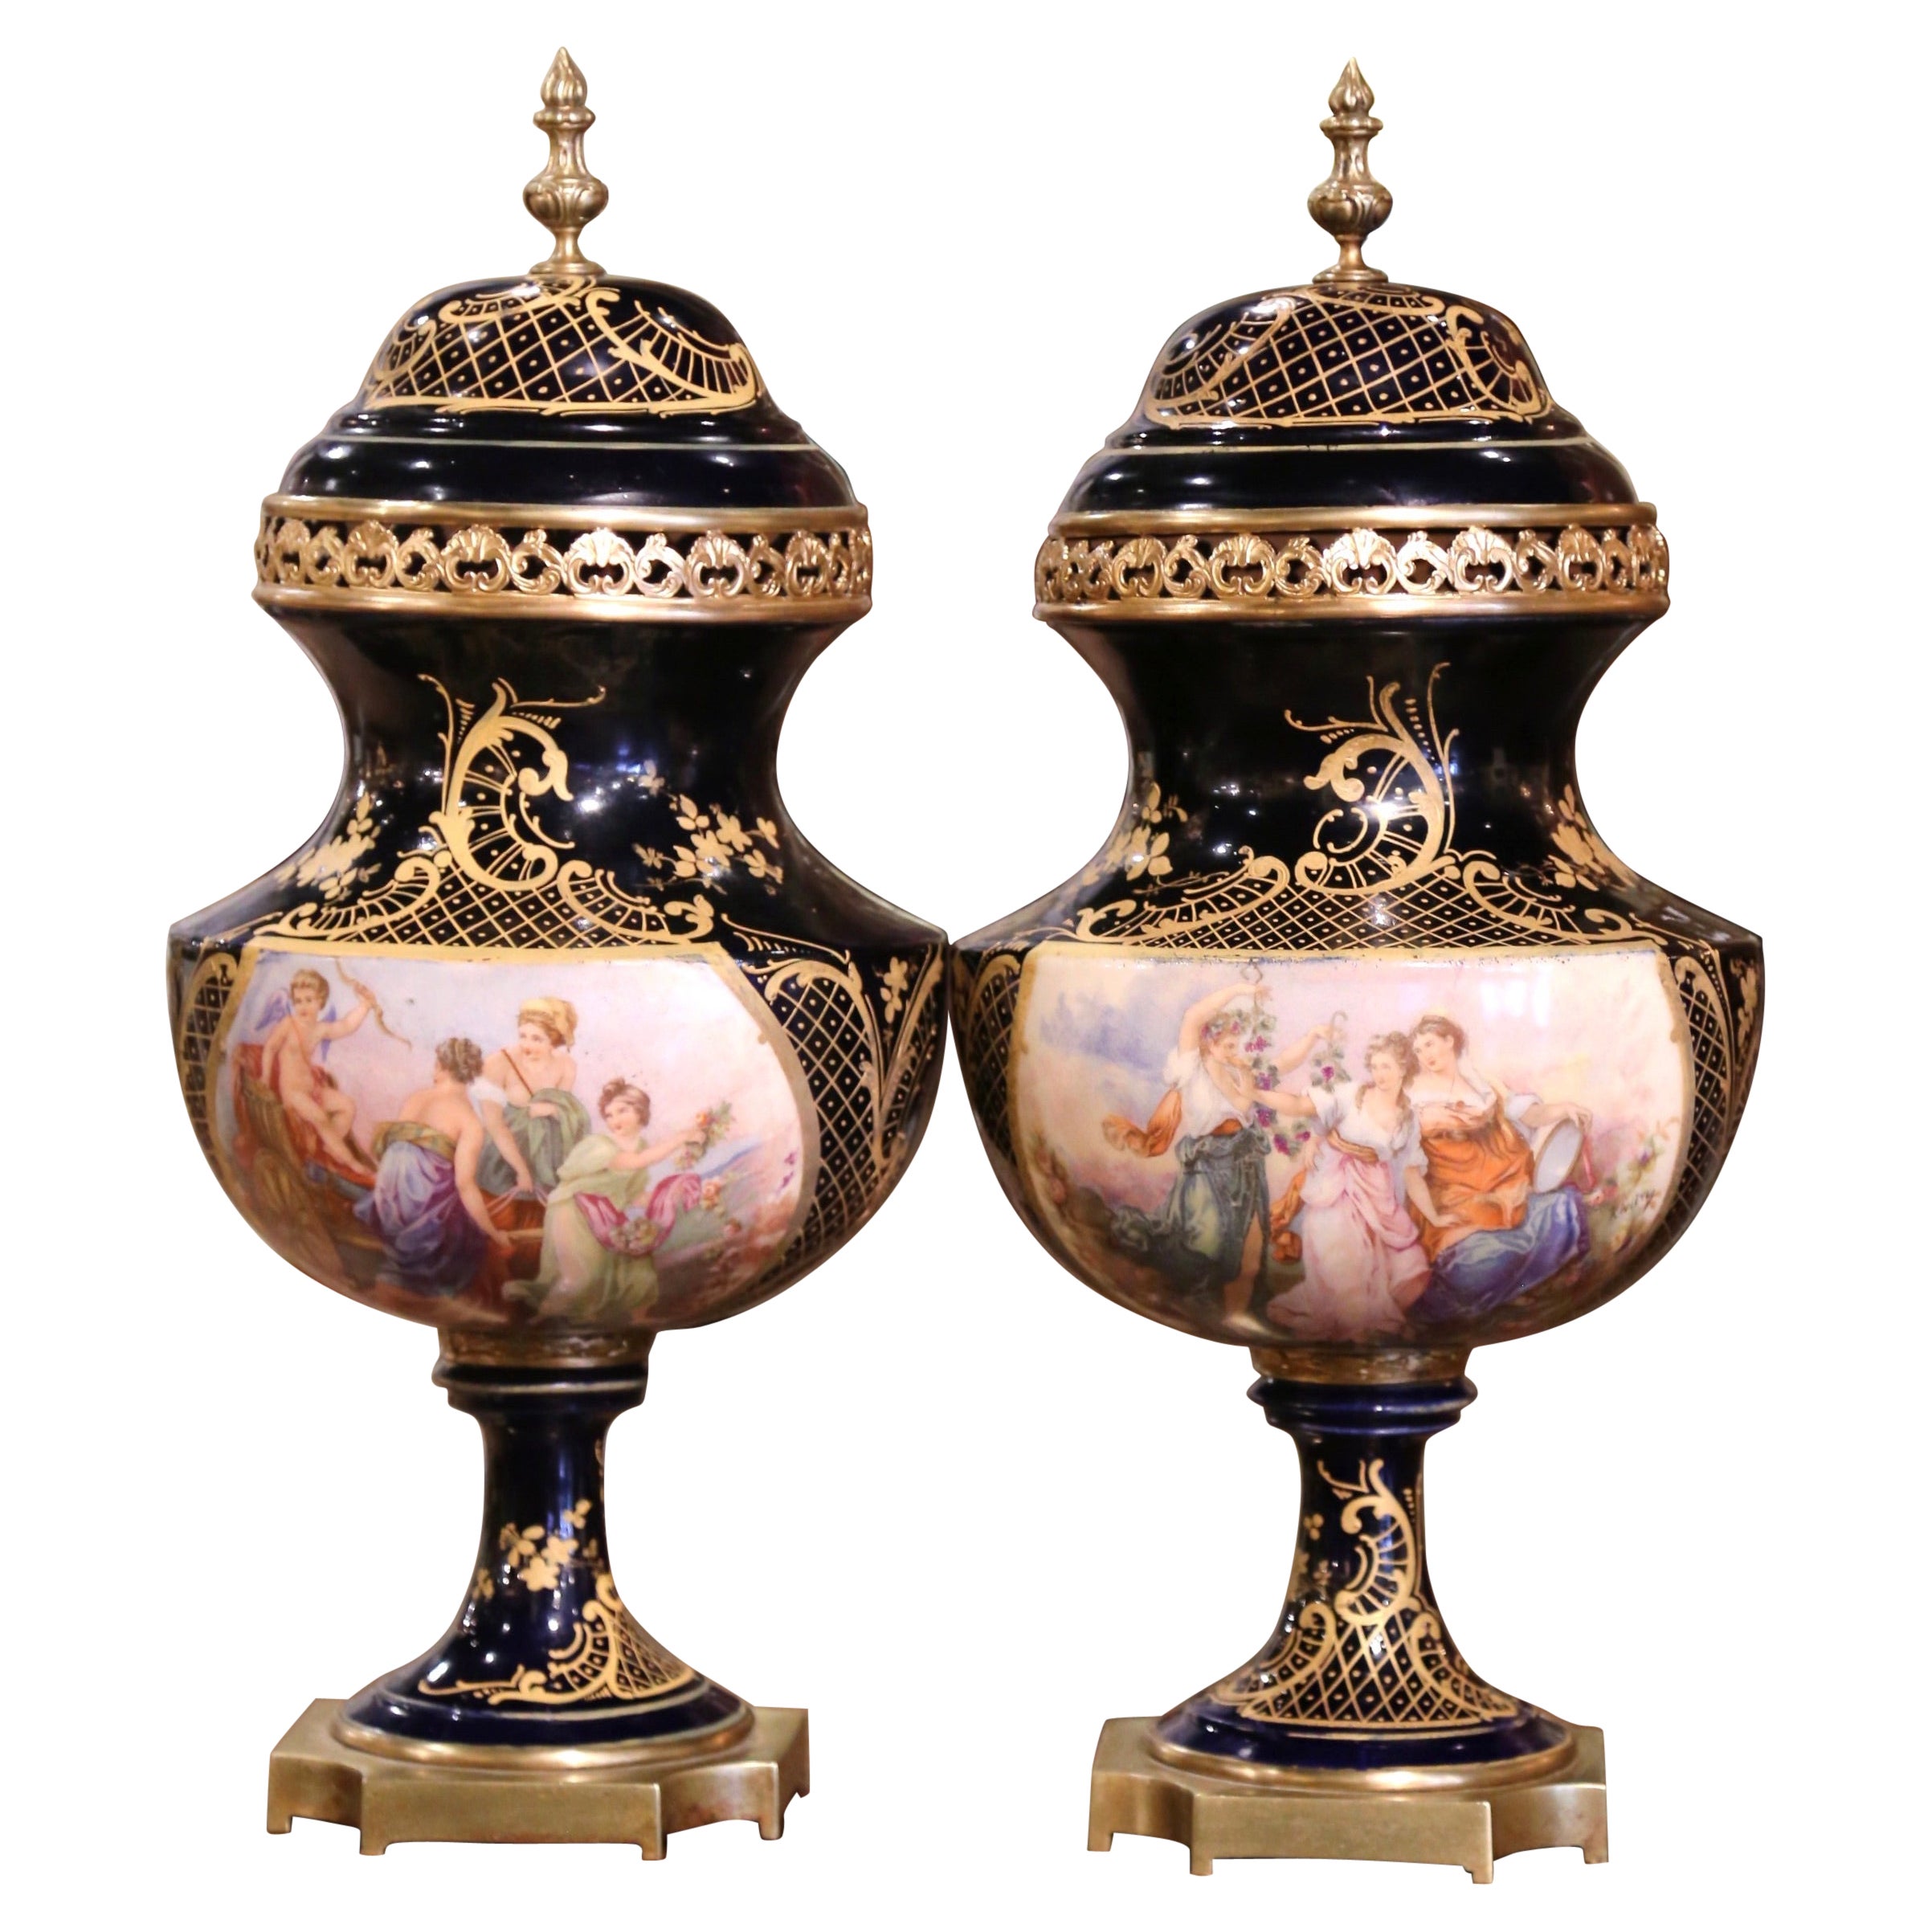 Pair of 19th Century French Sevres Royal Blue Porcelain & Bronze Covered Urns